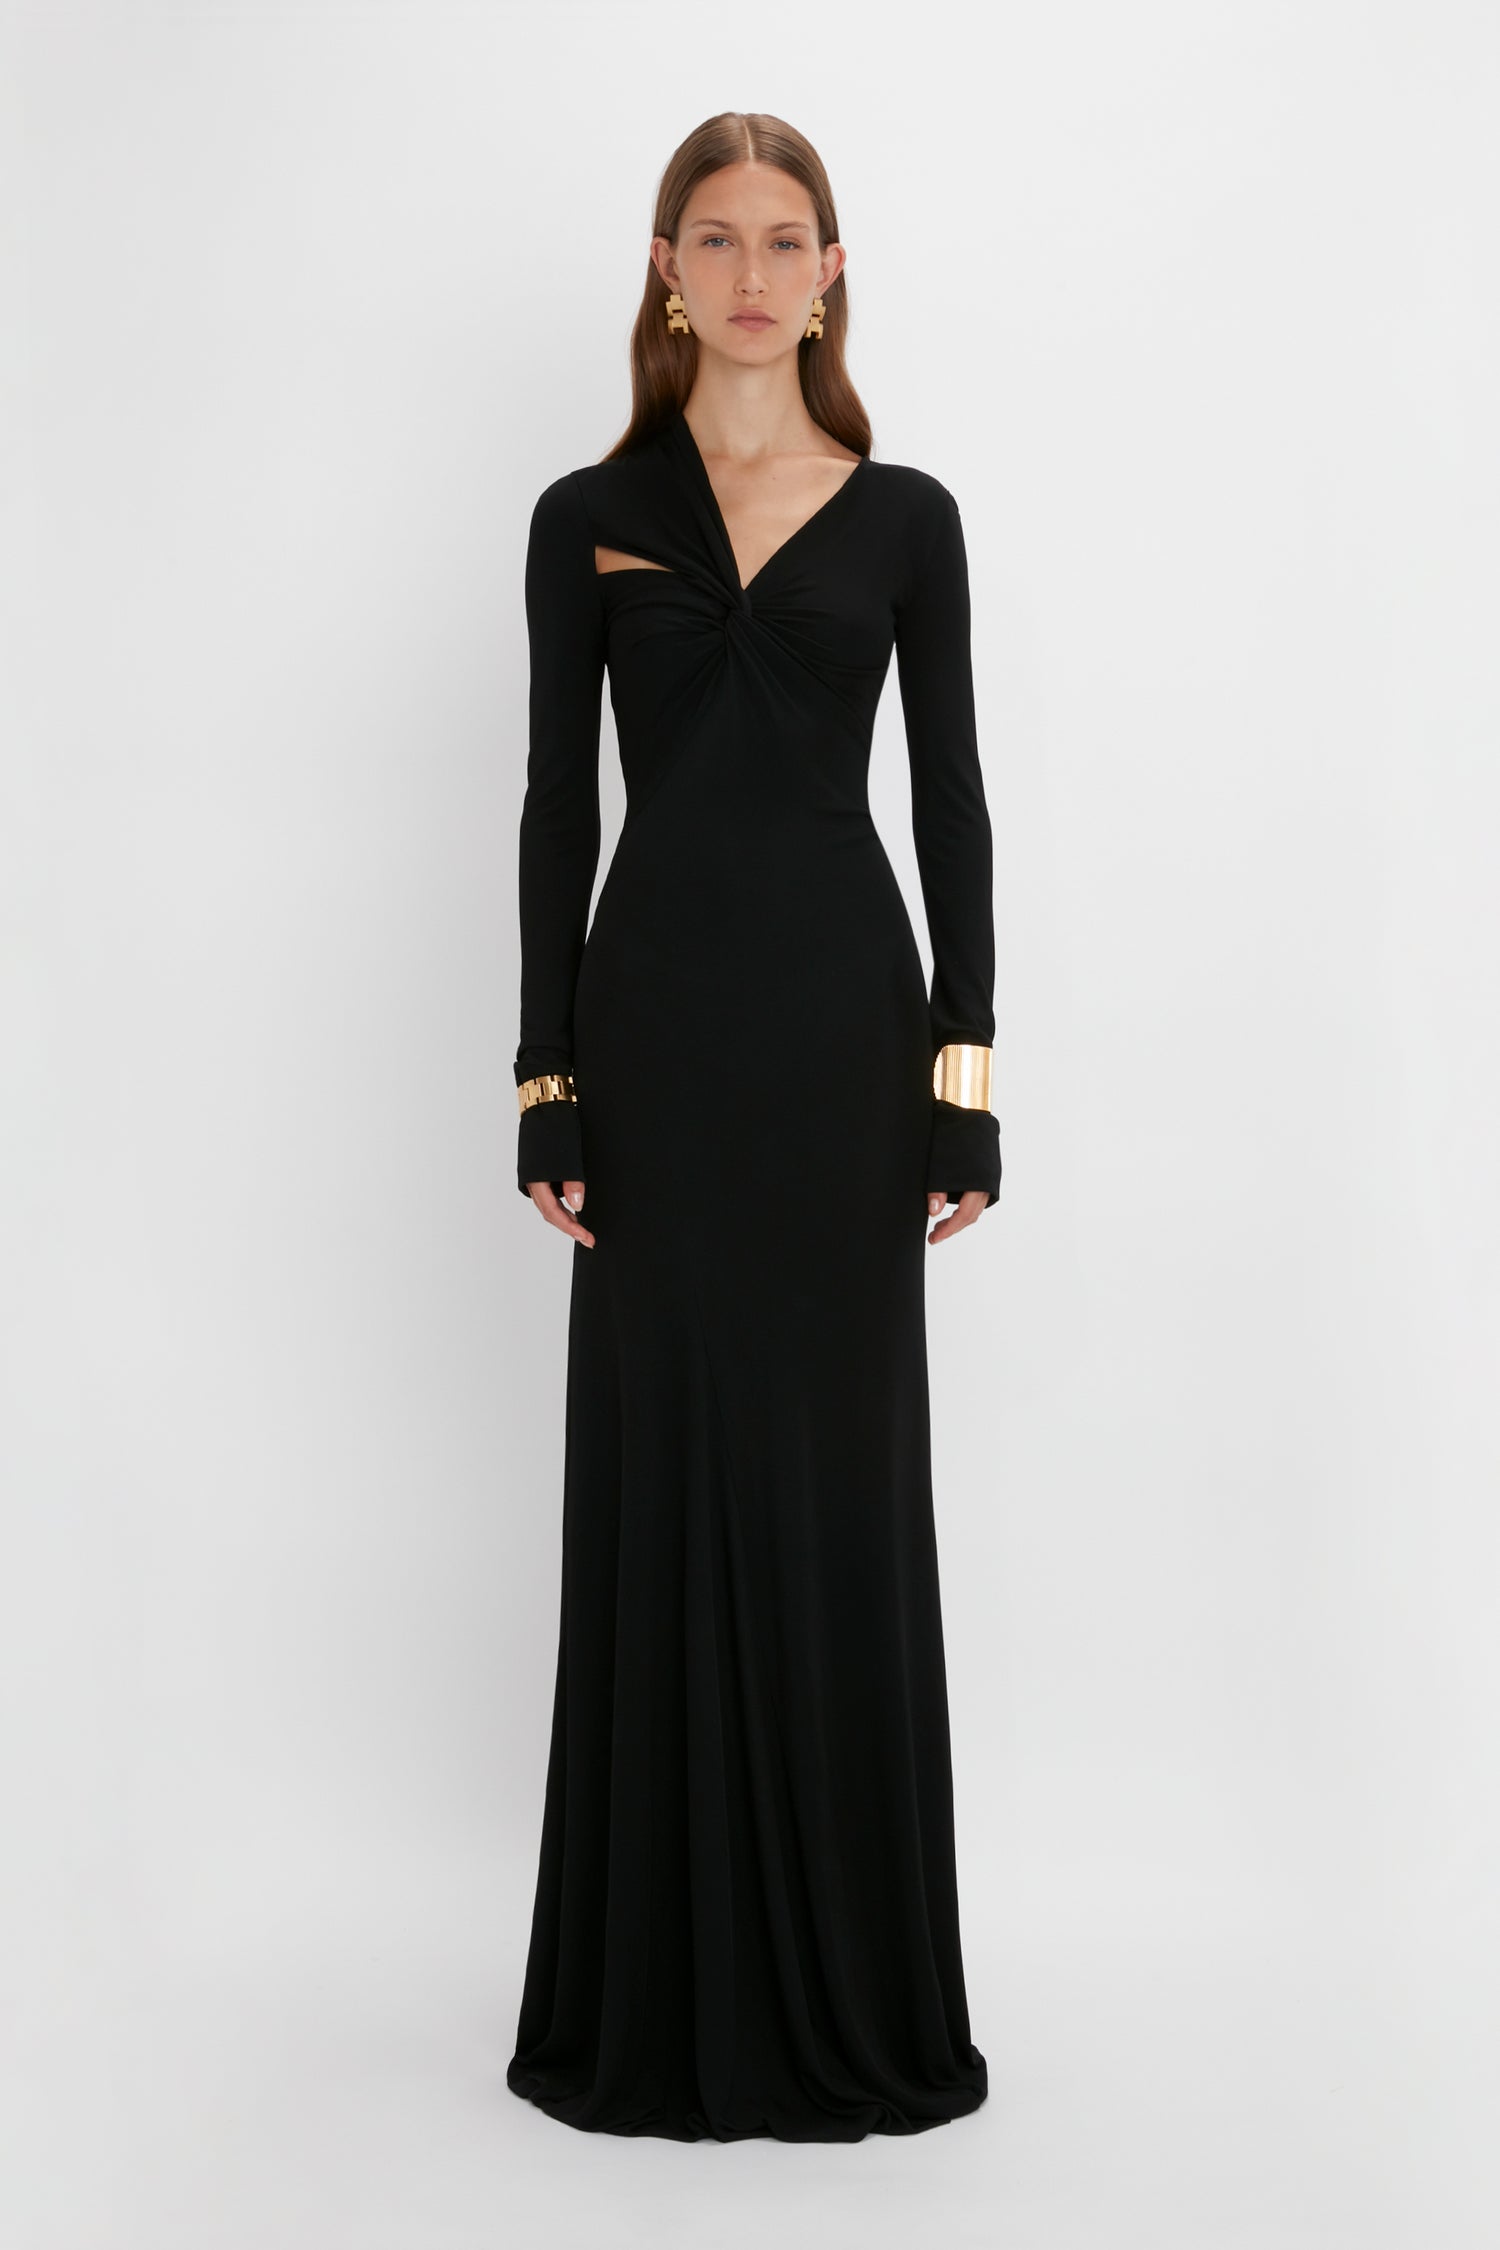 A woman stands against a plain white background, wearing a long black dress with long sleeves and a twisted front detail, accessorized with Exclusive Perfume Cuff bracelets in gold-plated brass and earrings by Victoria Beckham.